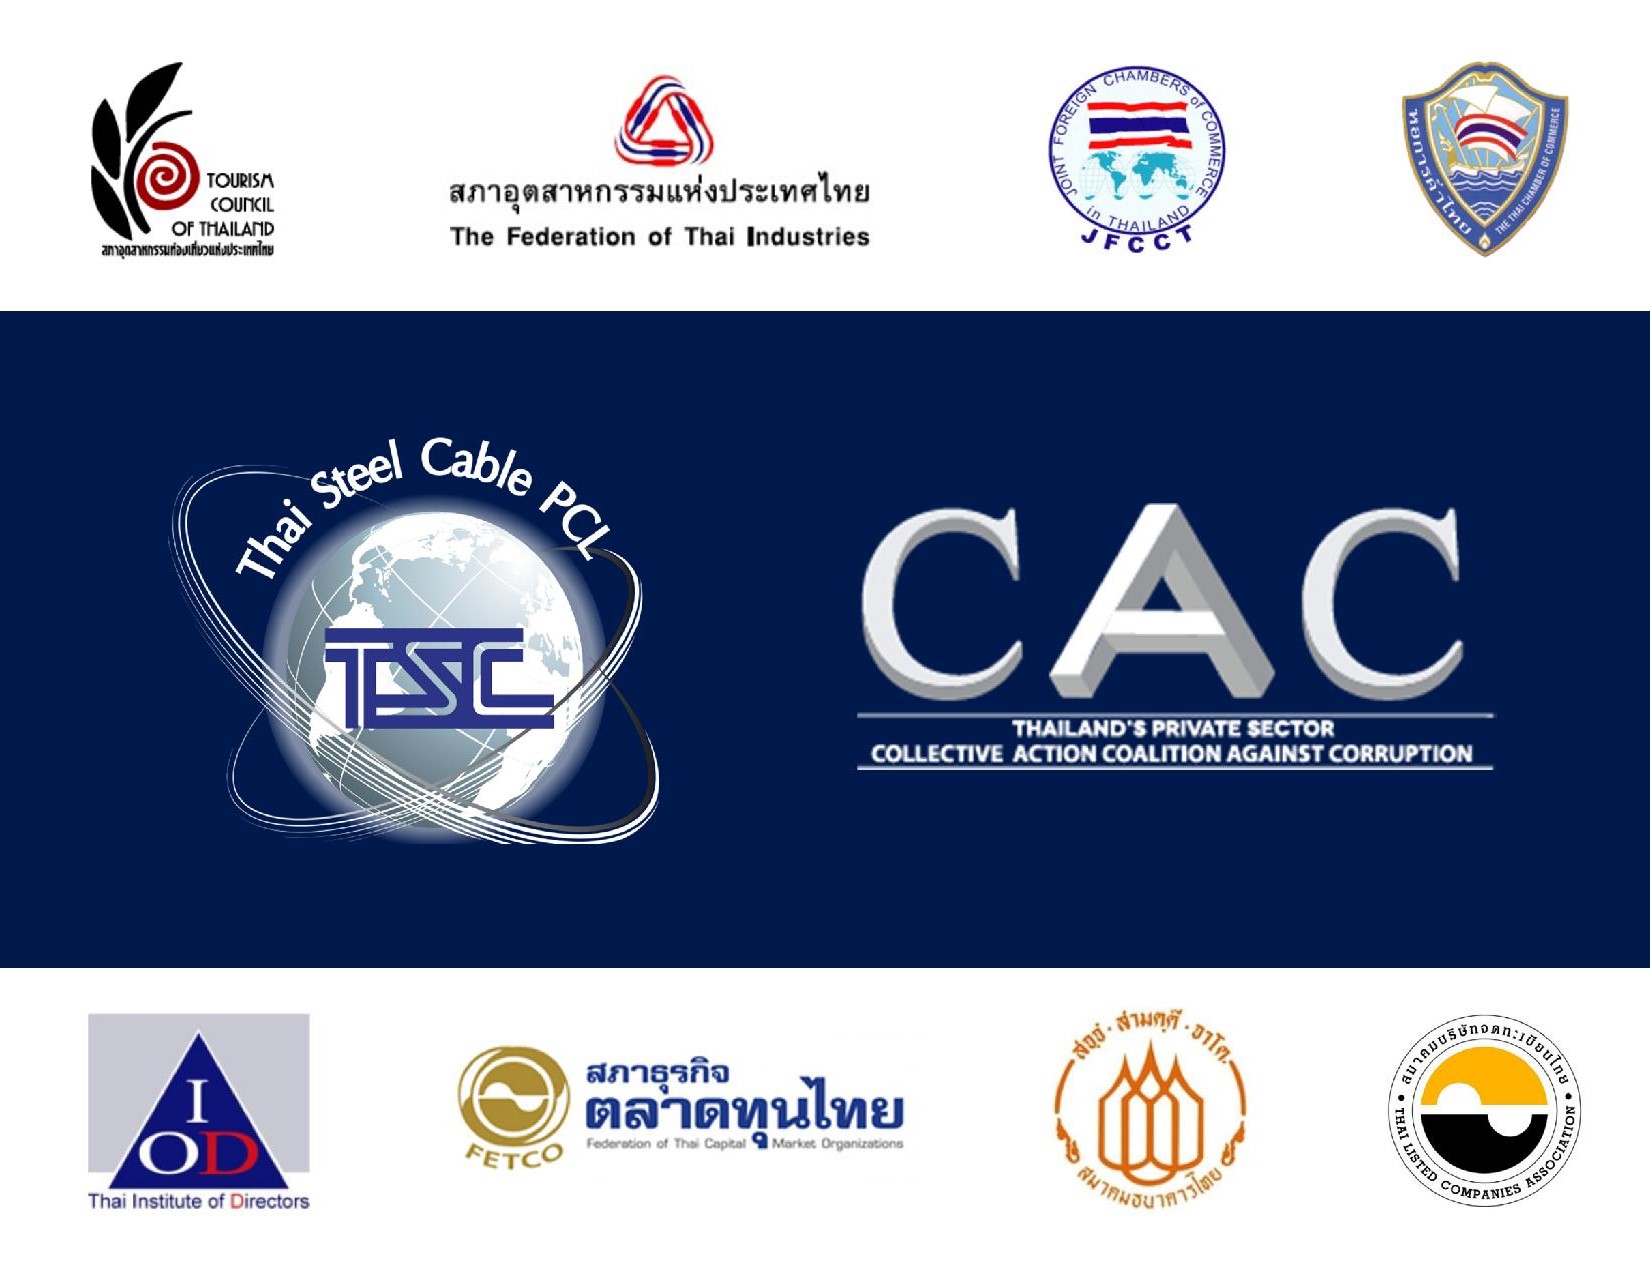 CAC certified Thai Steel Cable PCL (TSC)